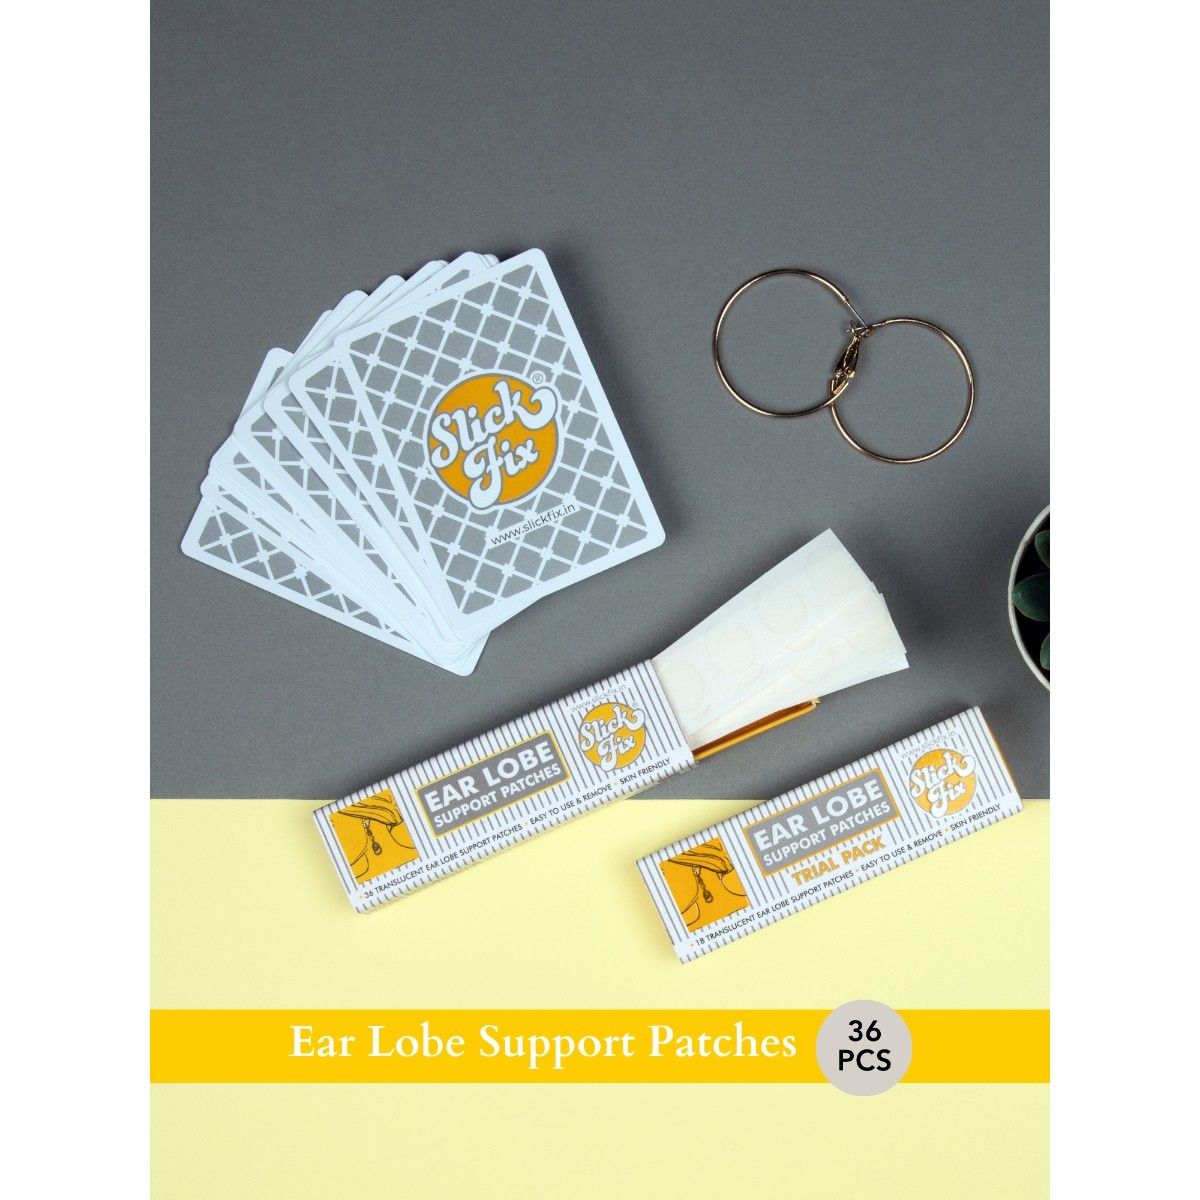 Earlift Invisible Ear Lobe Support Solution Relieve Strain